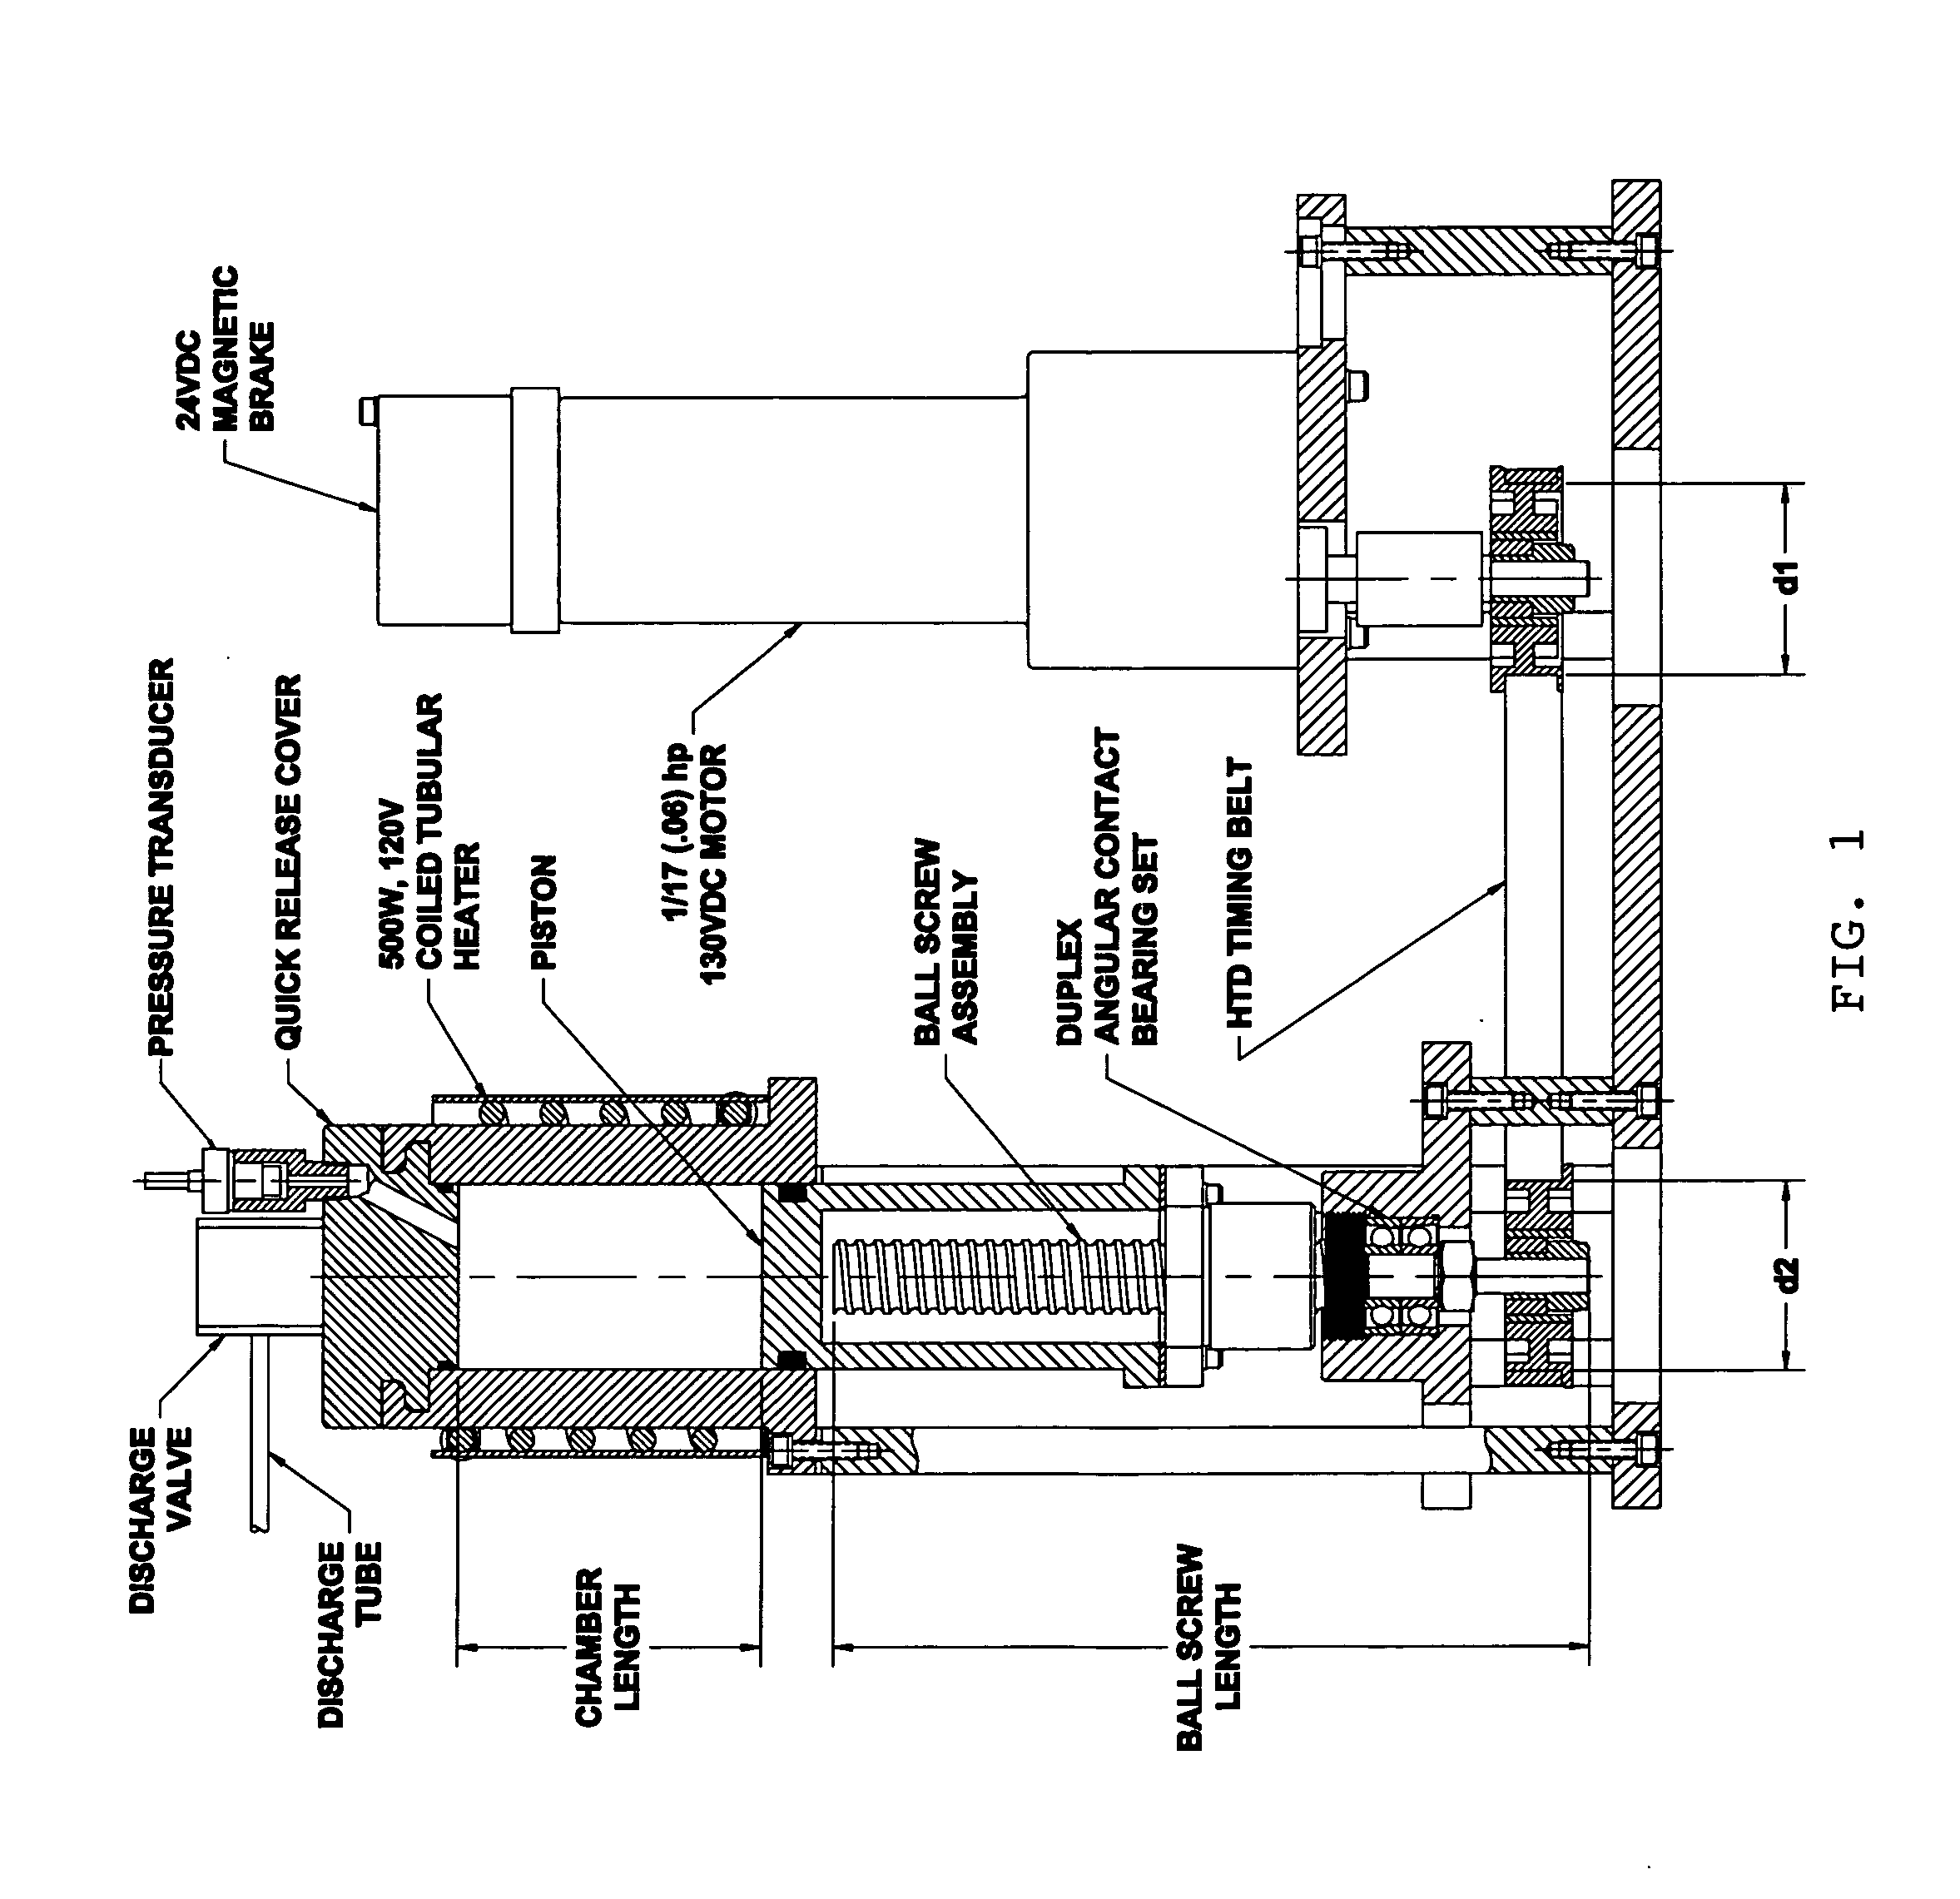 Apparatus, pods and methods for processing expandable food materials